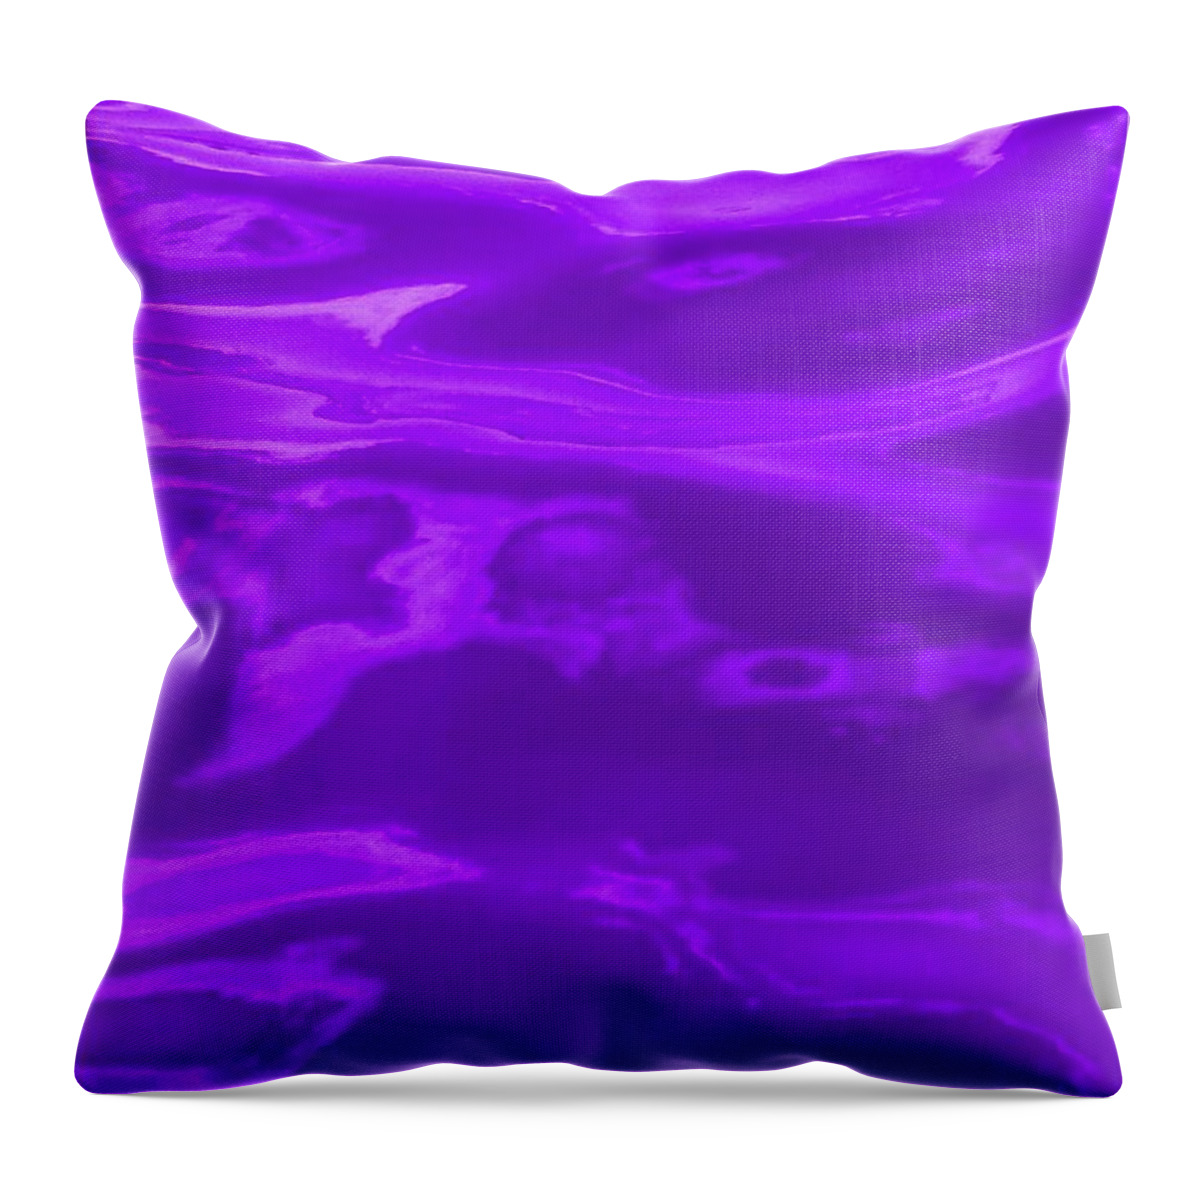 Multi Panel Throw Pillow featuring the photograph Colored Wave Purple Panel Three by Stephen Jorgensen